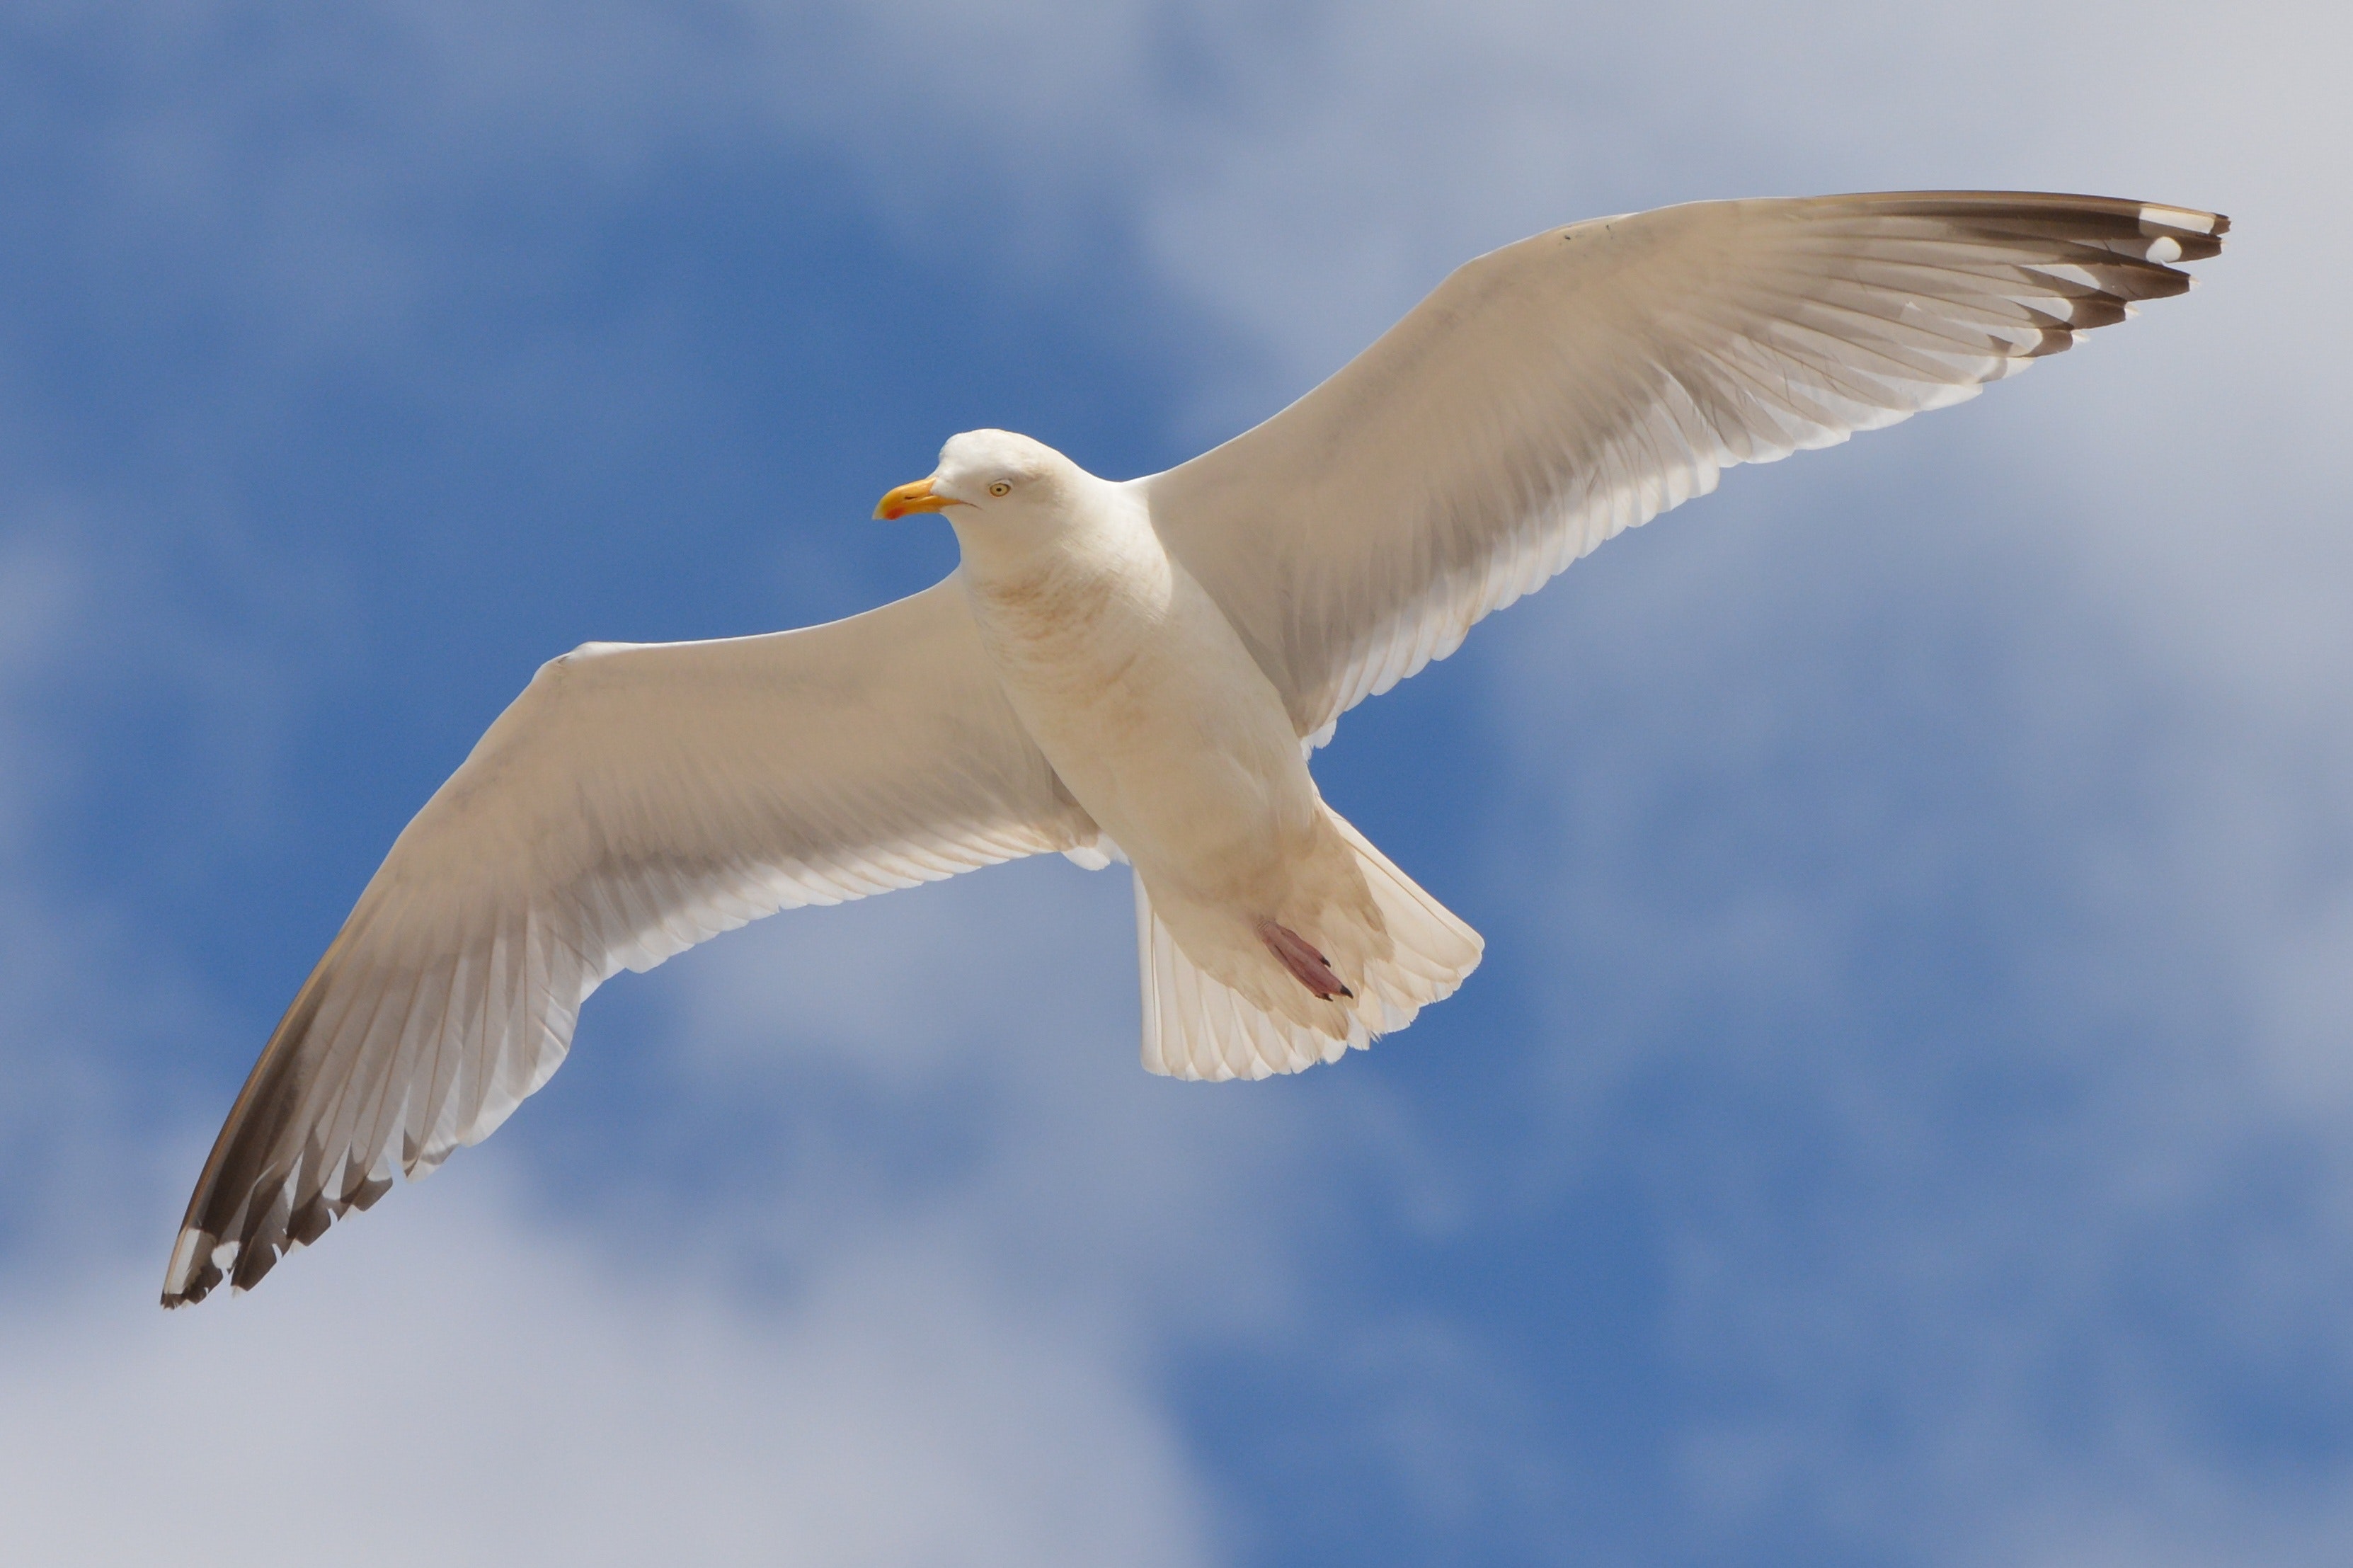 White Bird Flying Under the Blue and White Sky during Daytime · Free ...